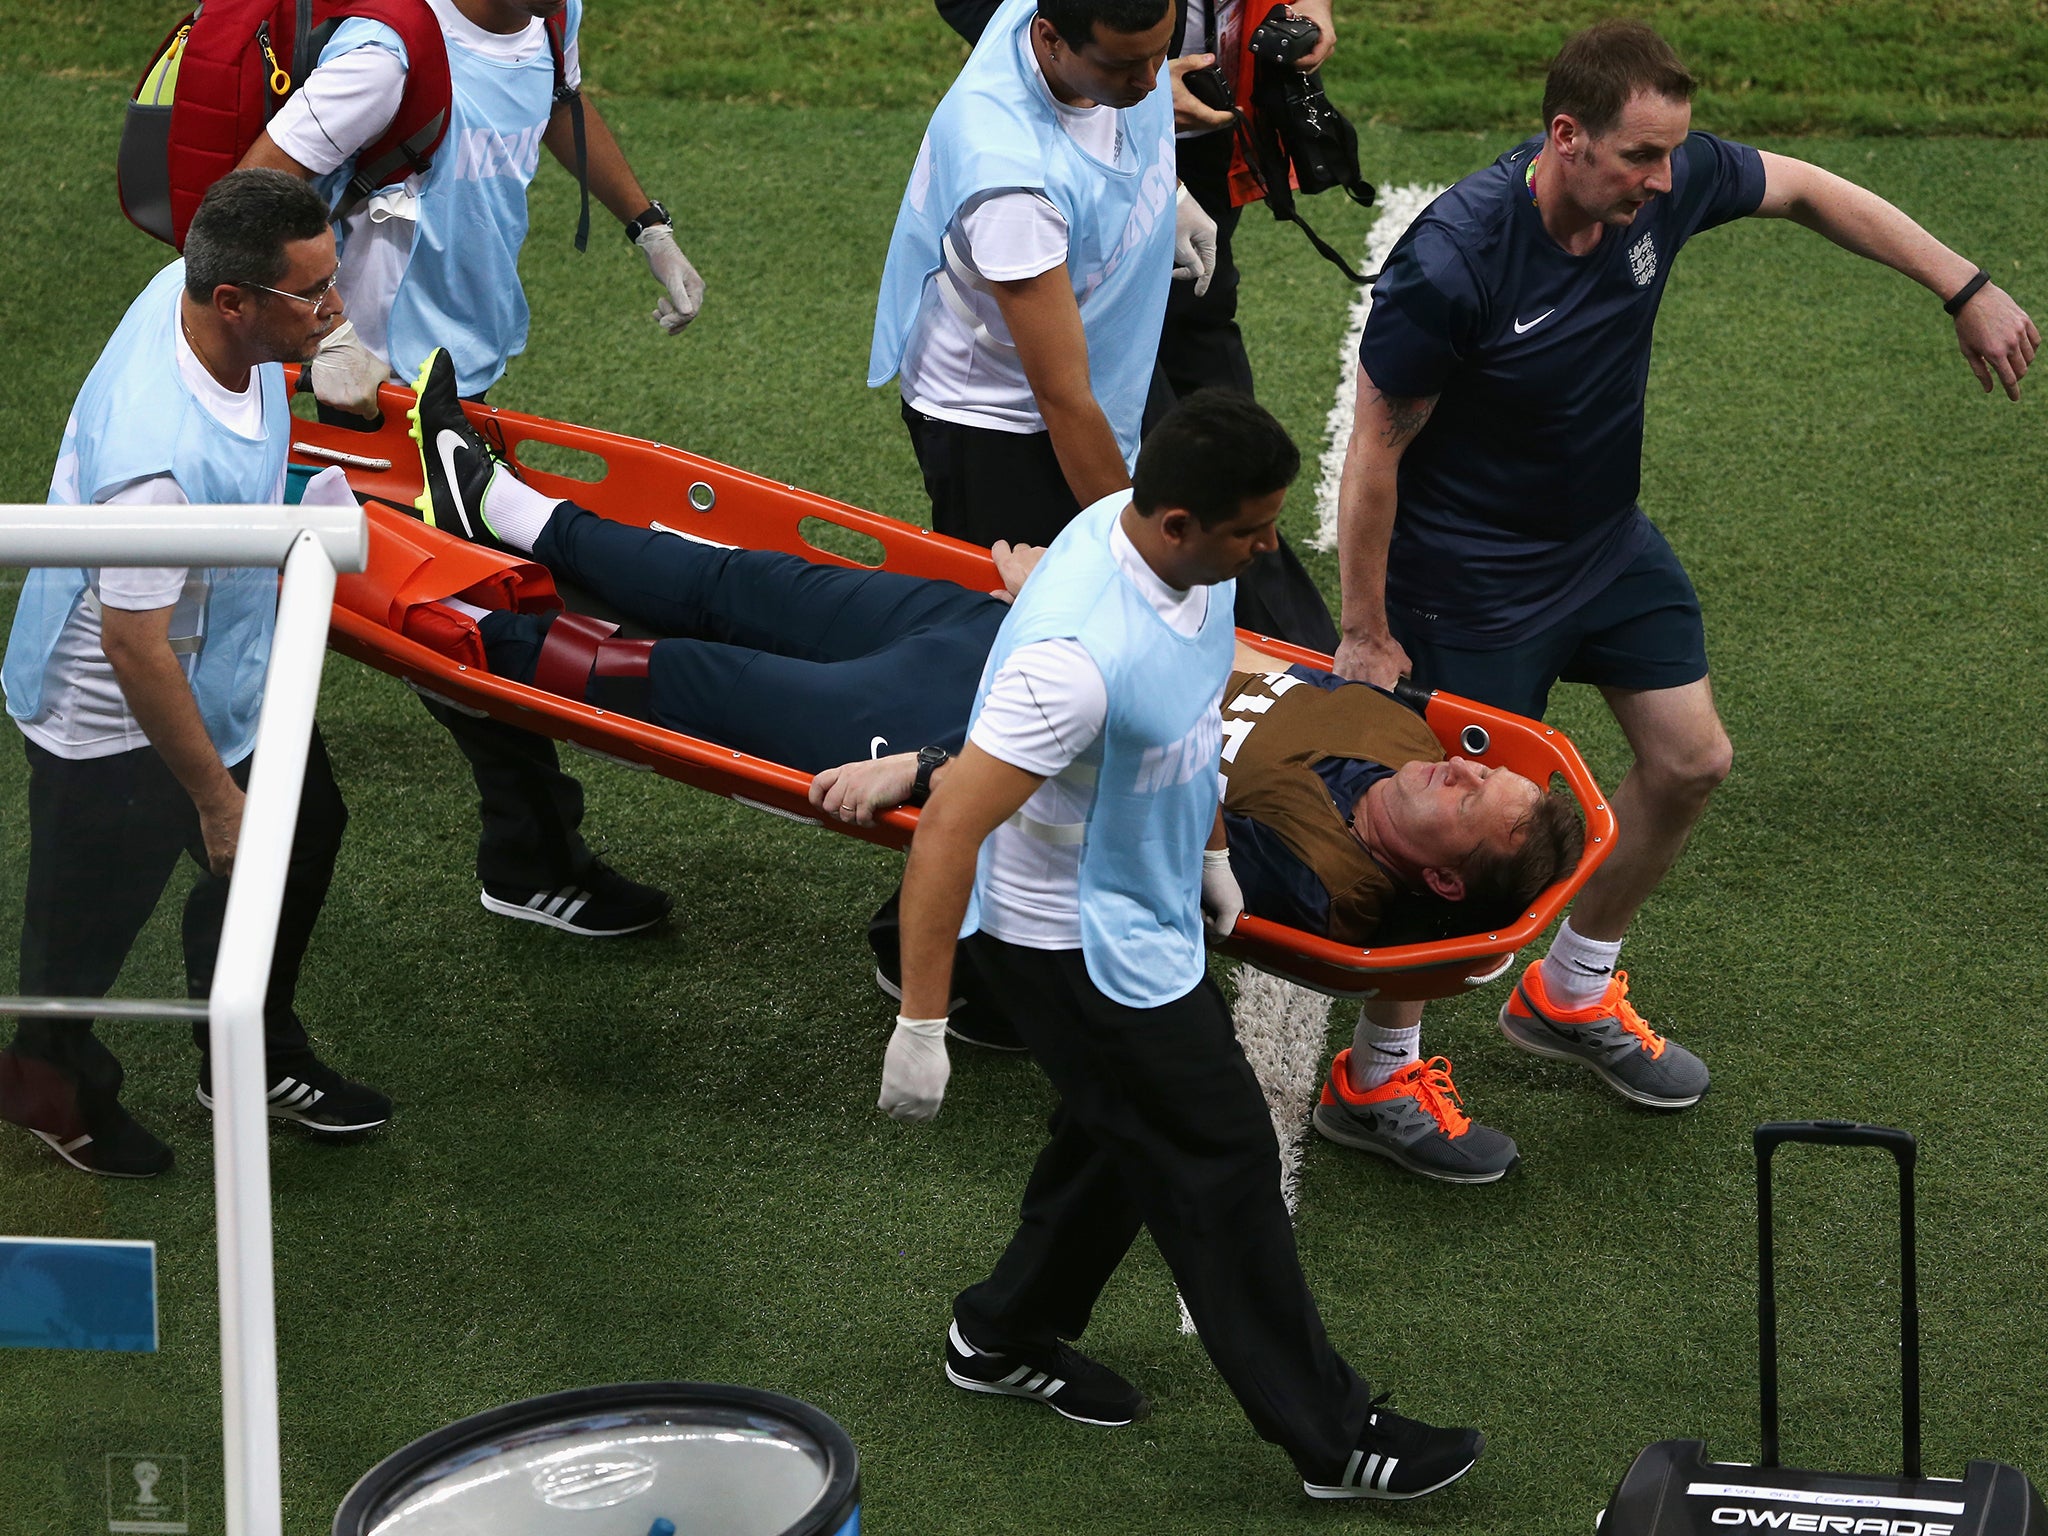 Gary Lewin is stretchered off, dislocating his ankle after landing on a water bottle